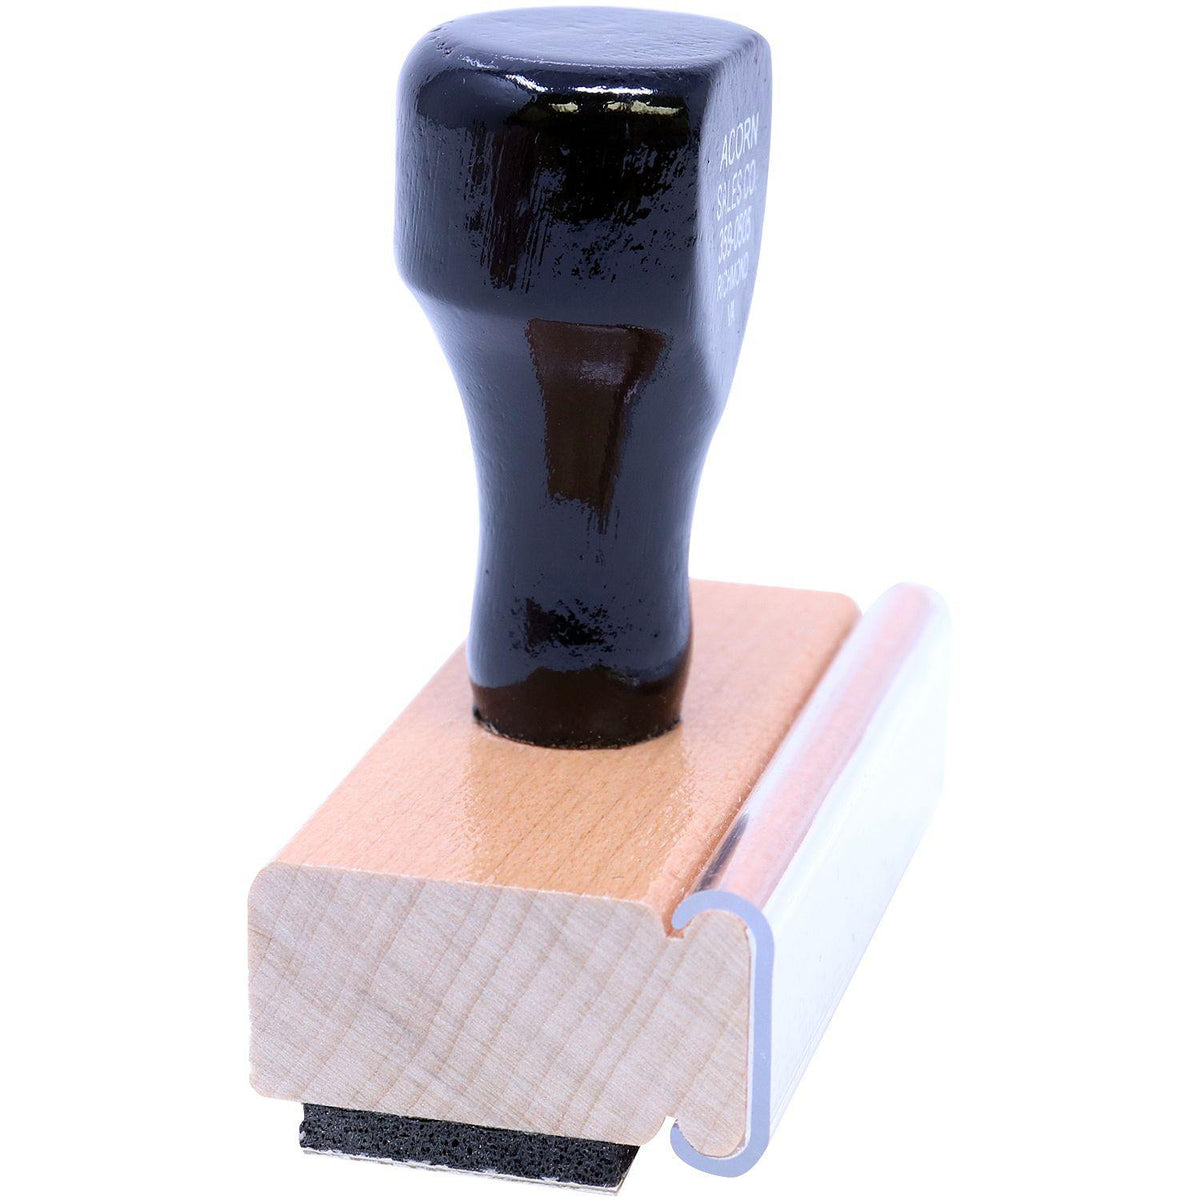 Side View of Covid-19 Patient Rubber Stamp at an Angle